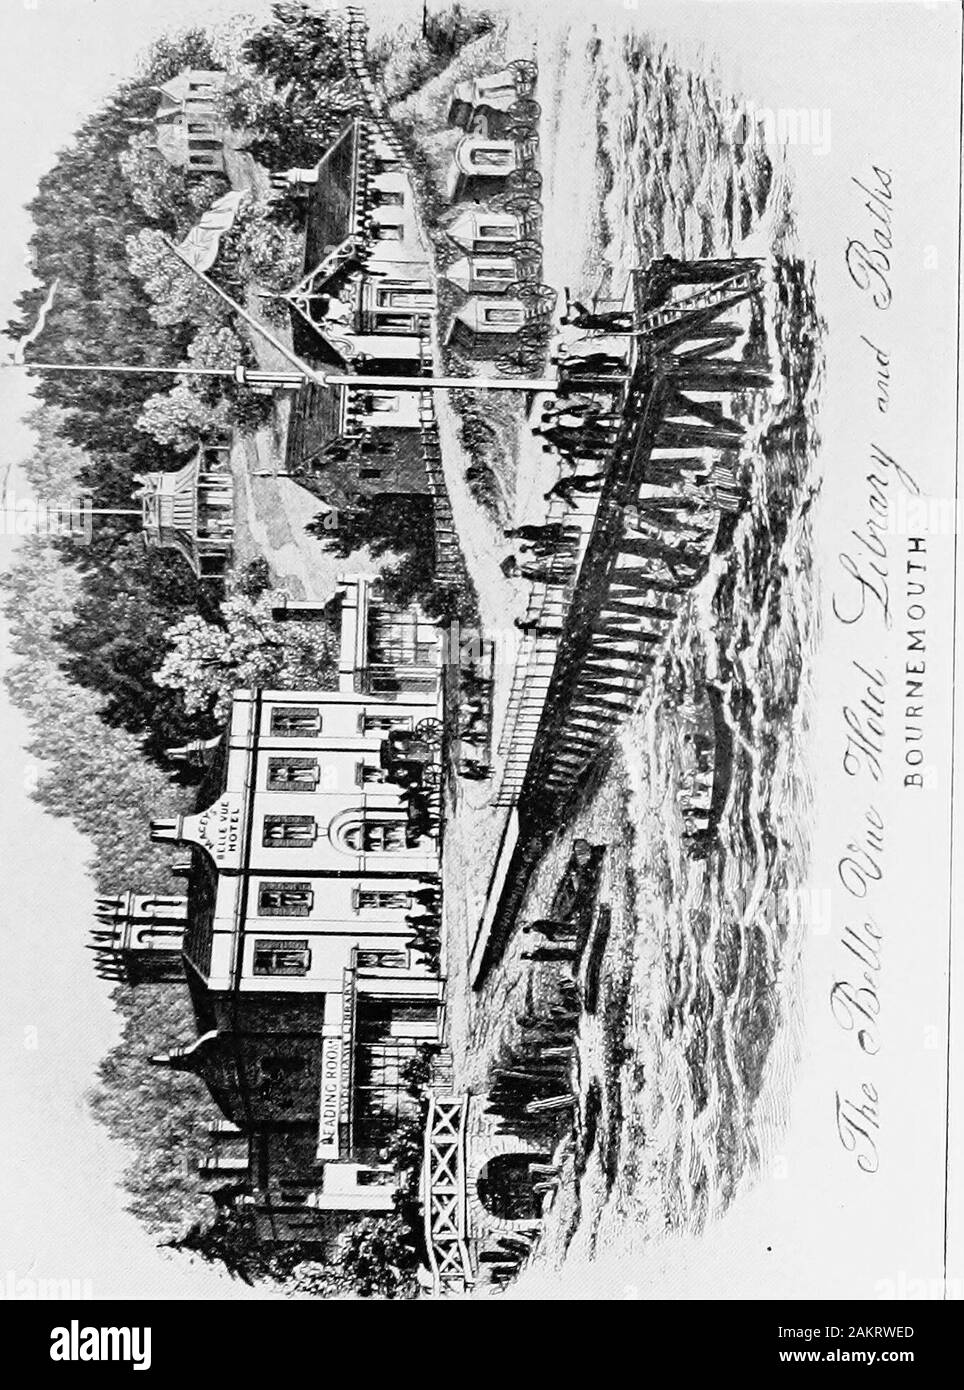 Bournemouth: 1810-1910, the history of a modern health and pleasure resort . rand dresser, of Christchurch, attends at Bournemouthevery Tuesday and Friday, and that orders for his servicesmight be left at the Post Office or at the Tregonwell Arms.Every birth and death within the district had to be registeredat Christchurch, and not till late in the last quarter of thecentury could any marriage be celebrated in a Nonconformistplace of worship, without one or other, or both, the partiesmaking pilgrimage to the mother town. Any villager so poor as to need assistance from the rates had to applyto Stock Photo